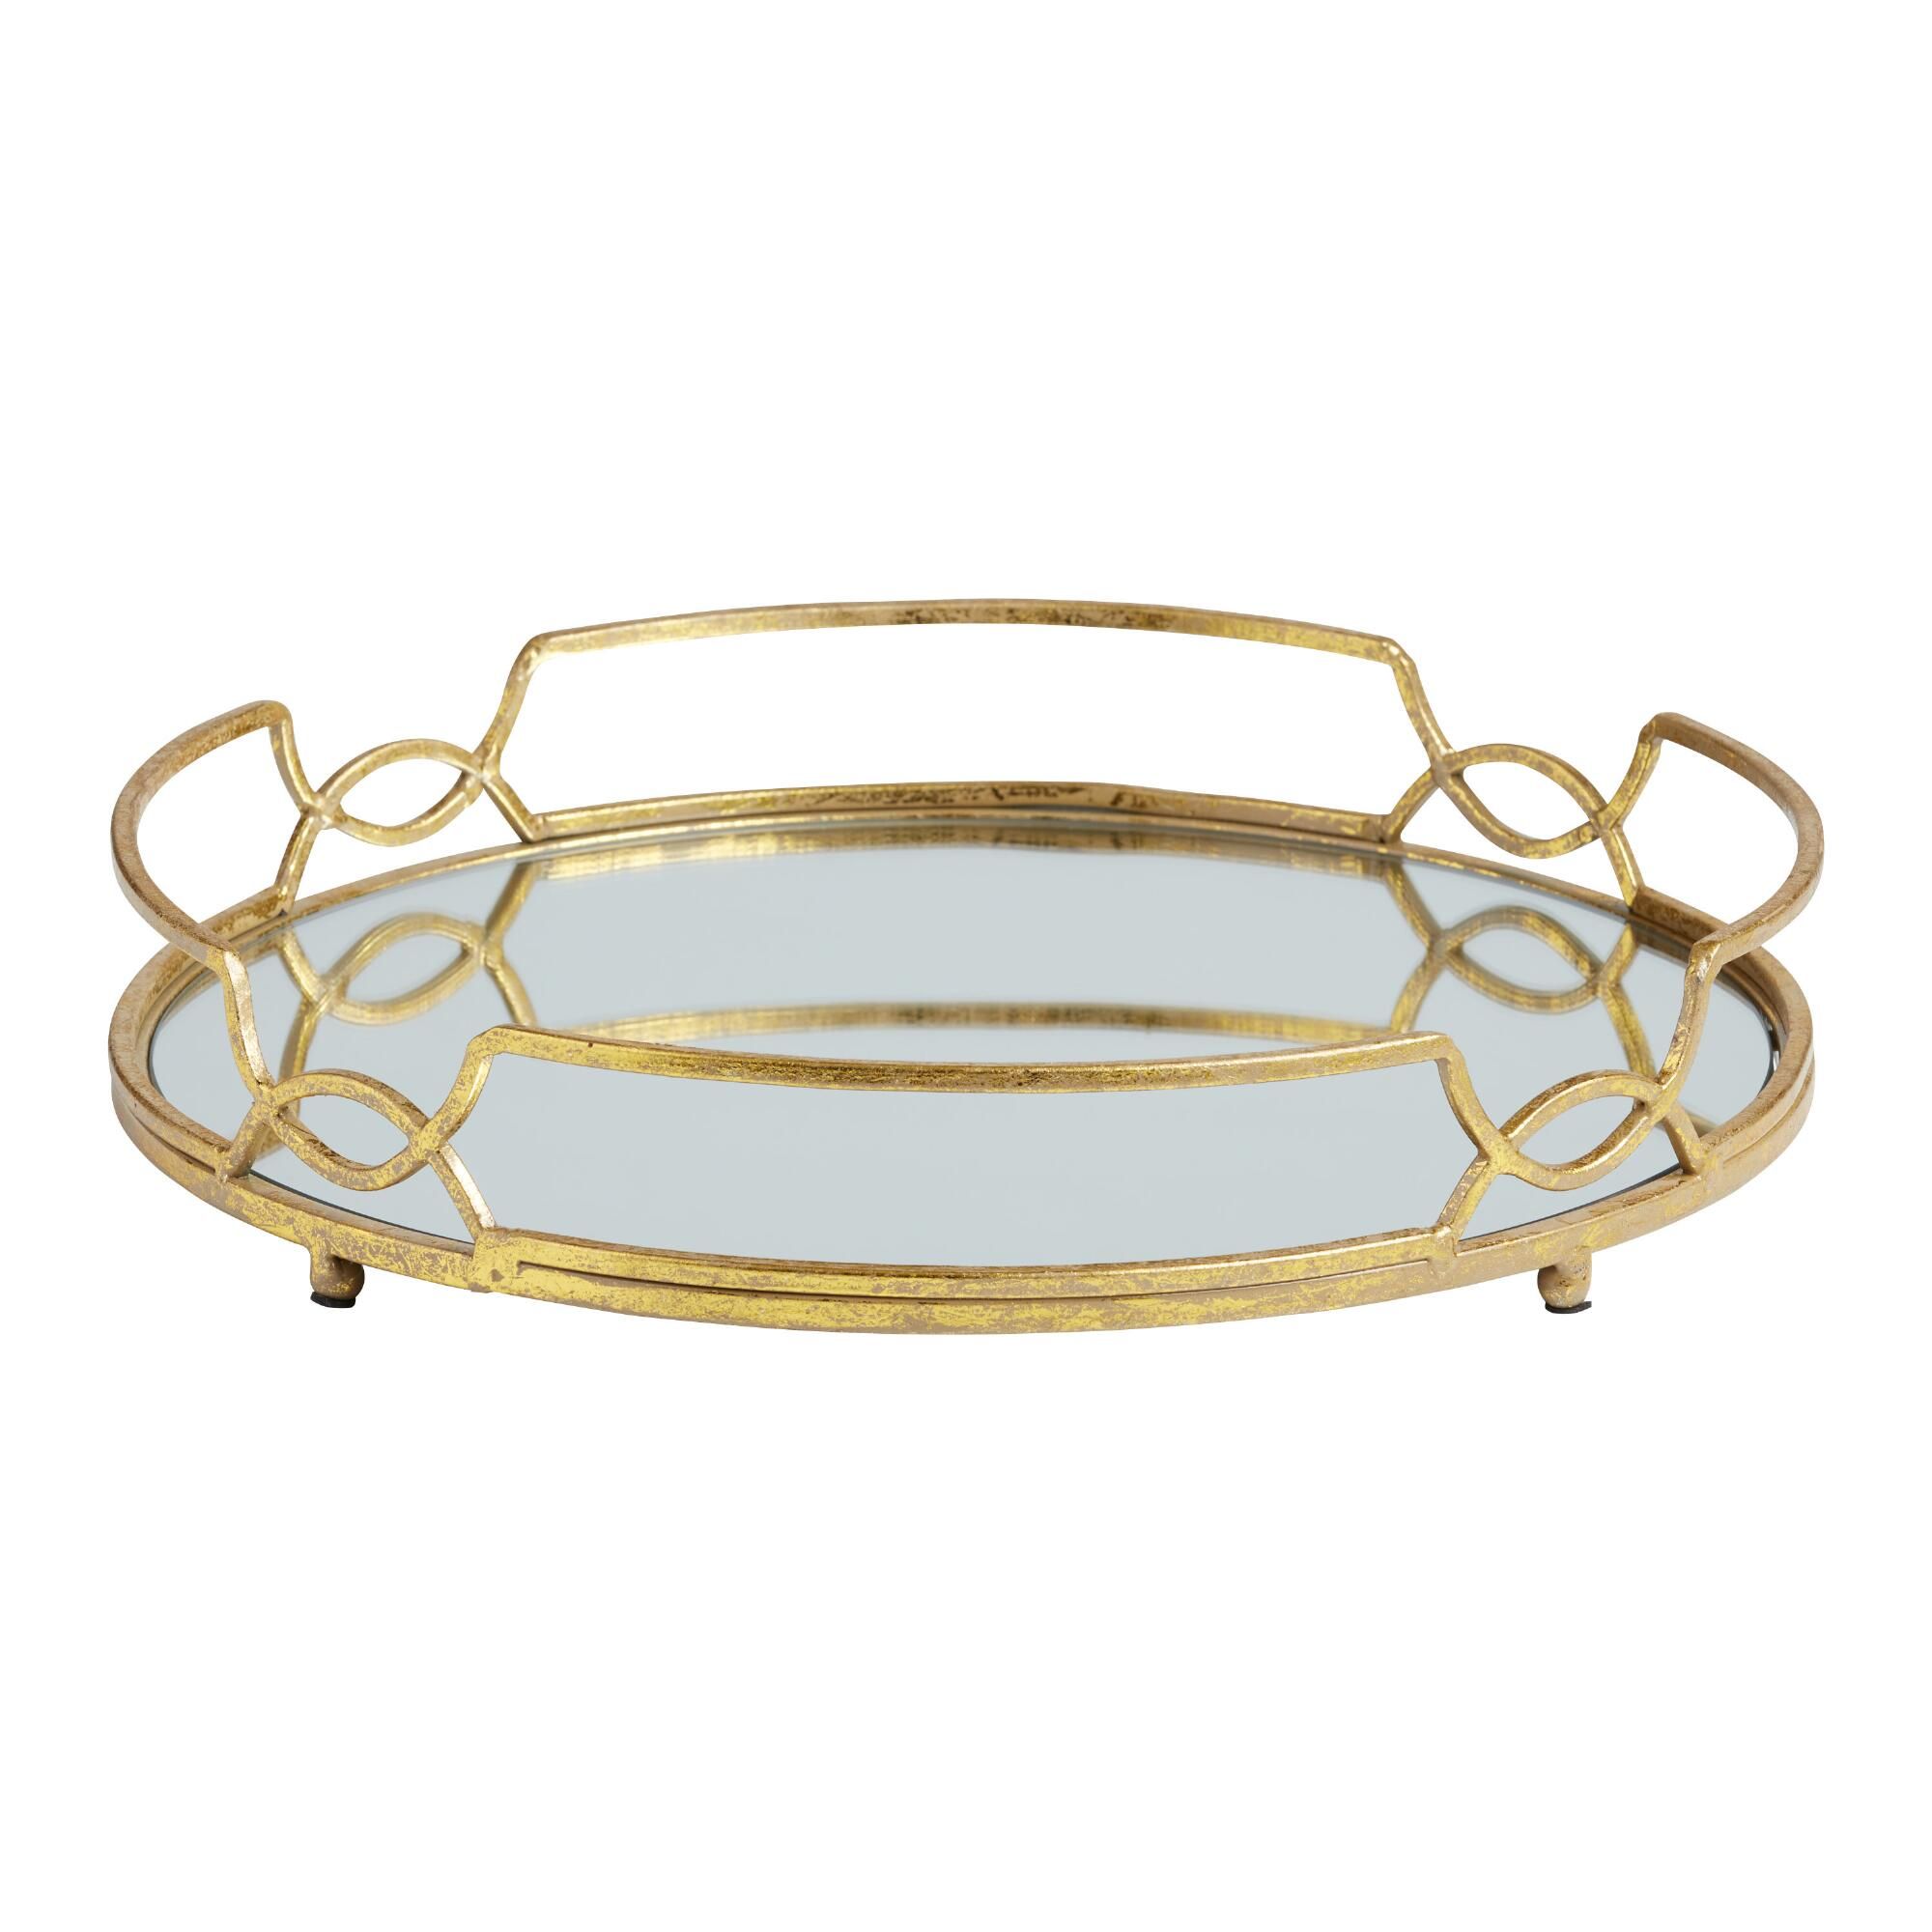 Gold Mirrored Tabletop Tray - Metal by World Market | World Market